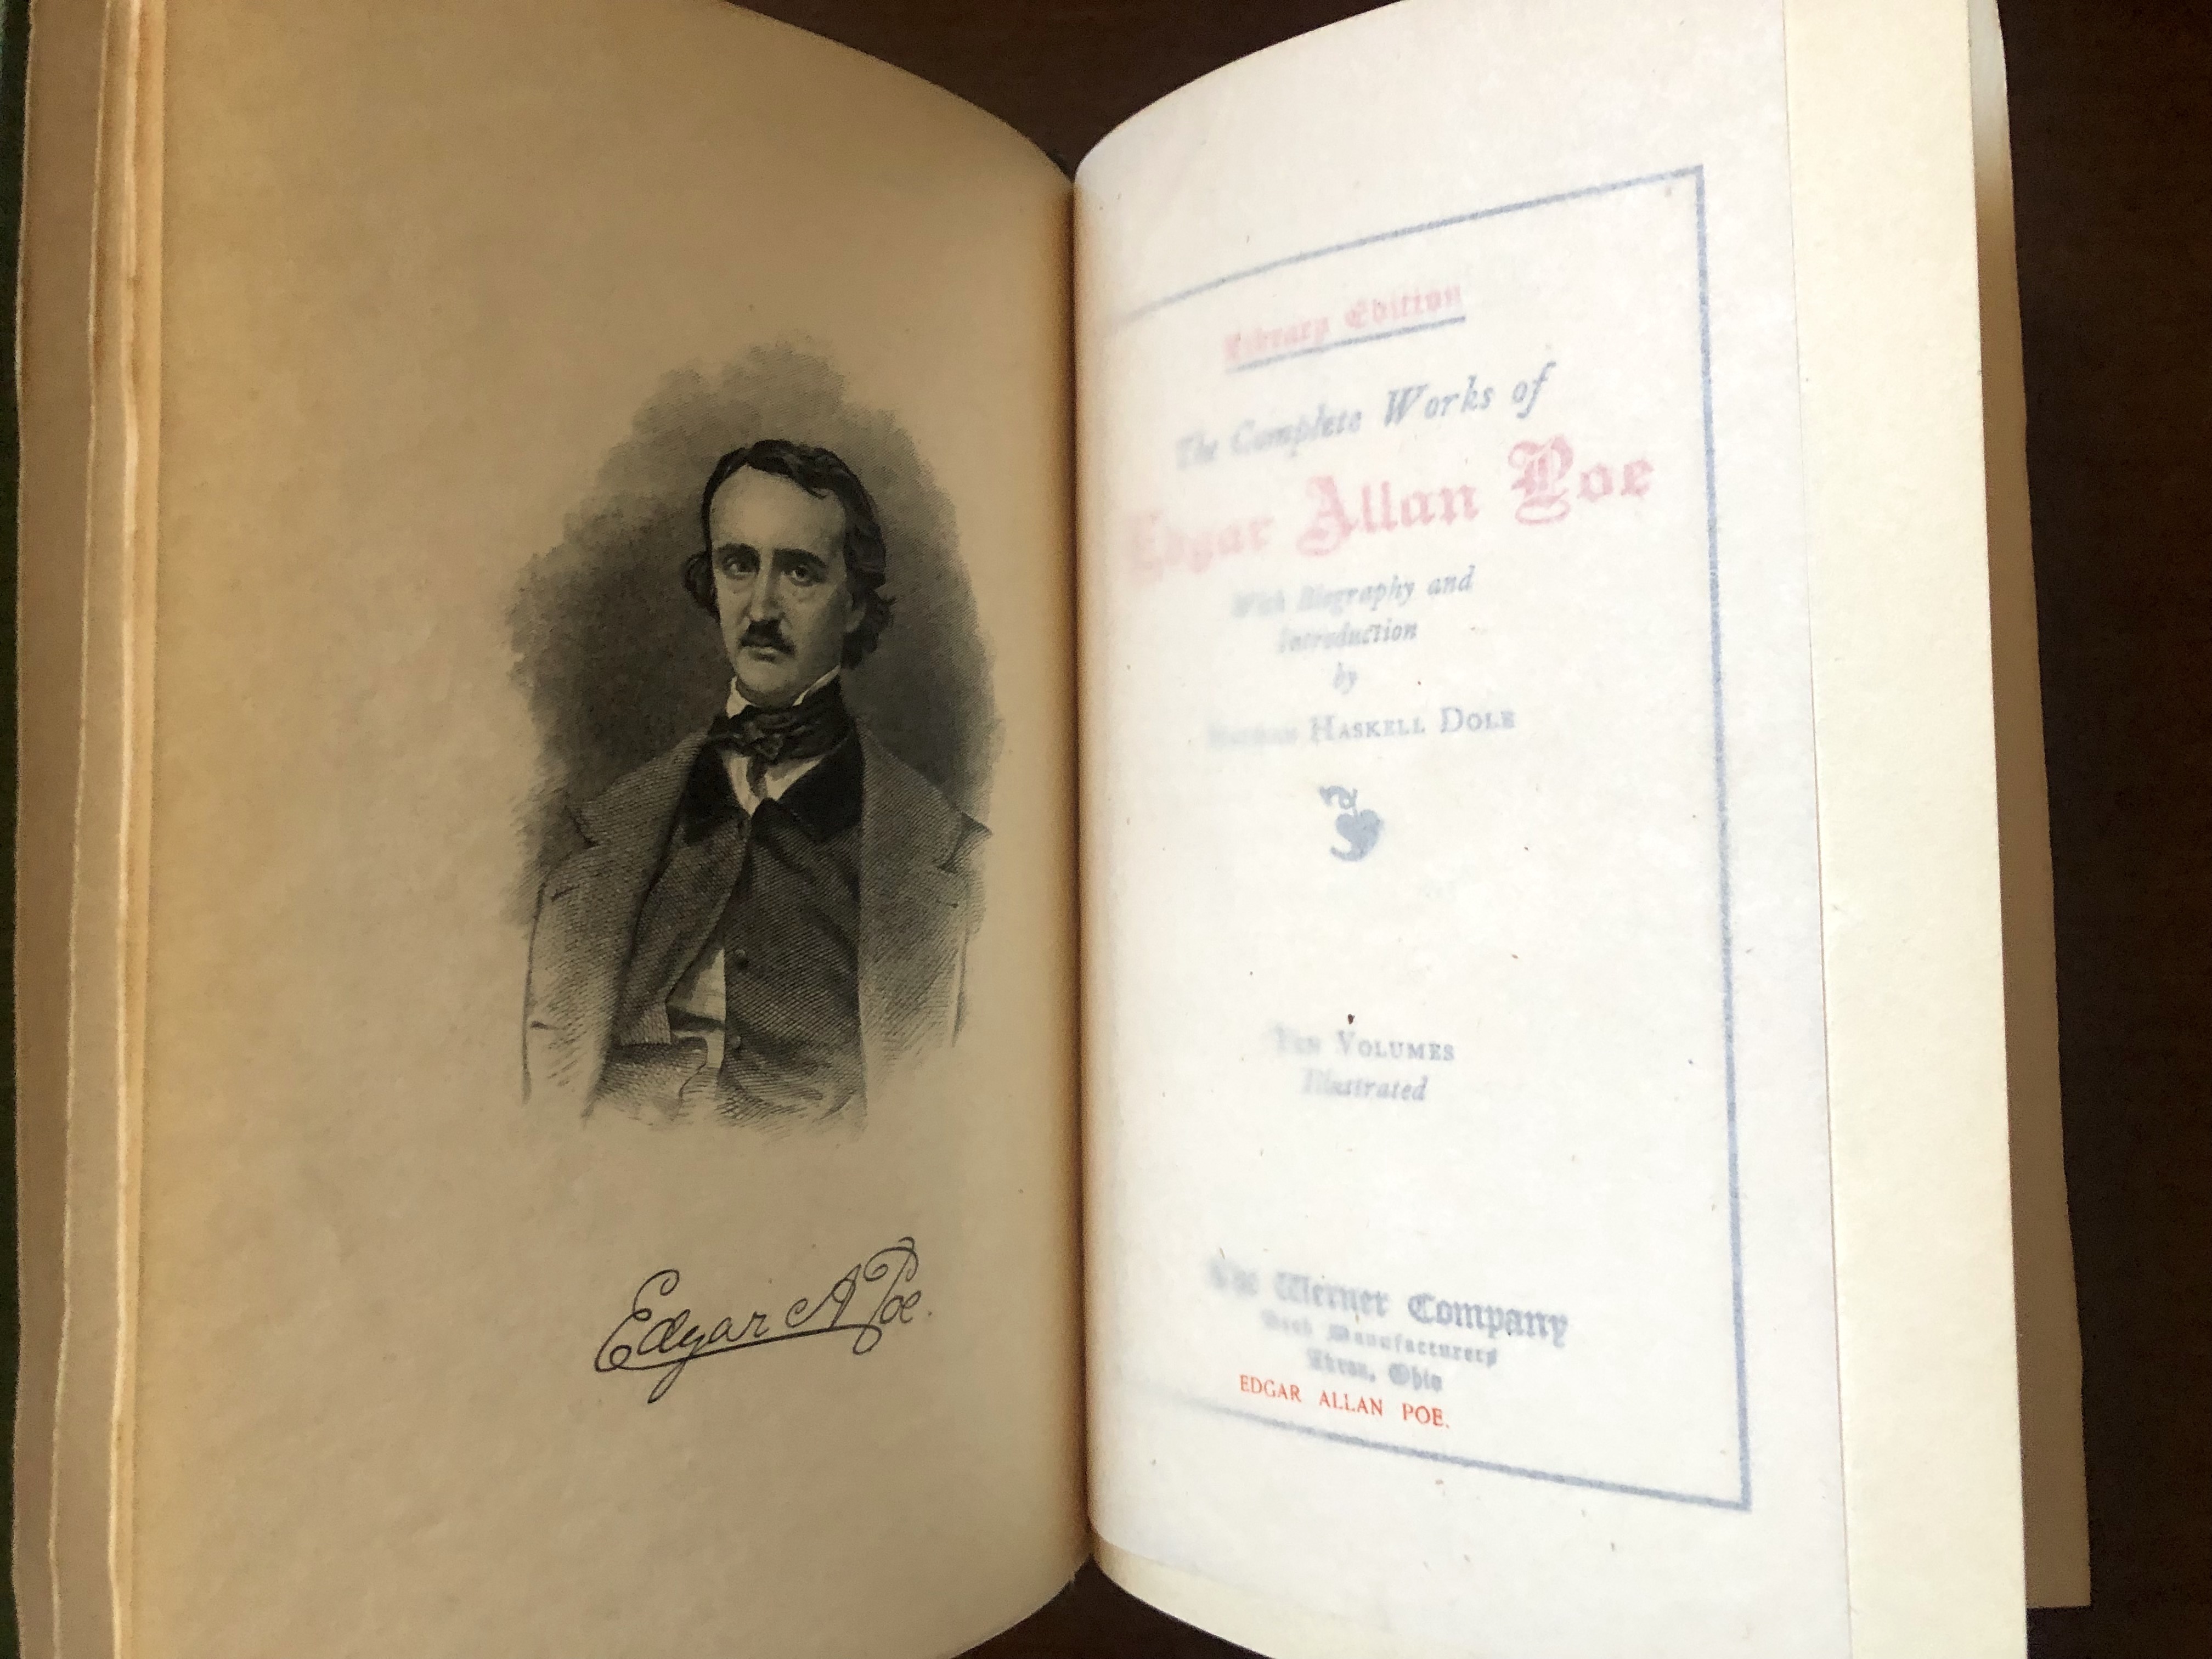 edgar allan poe biography and works